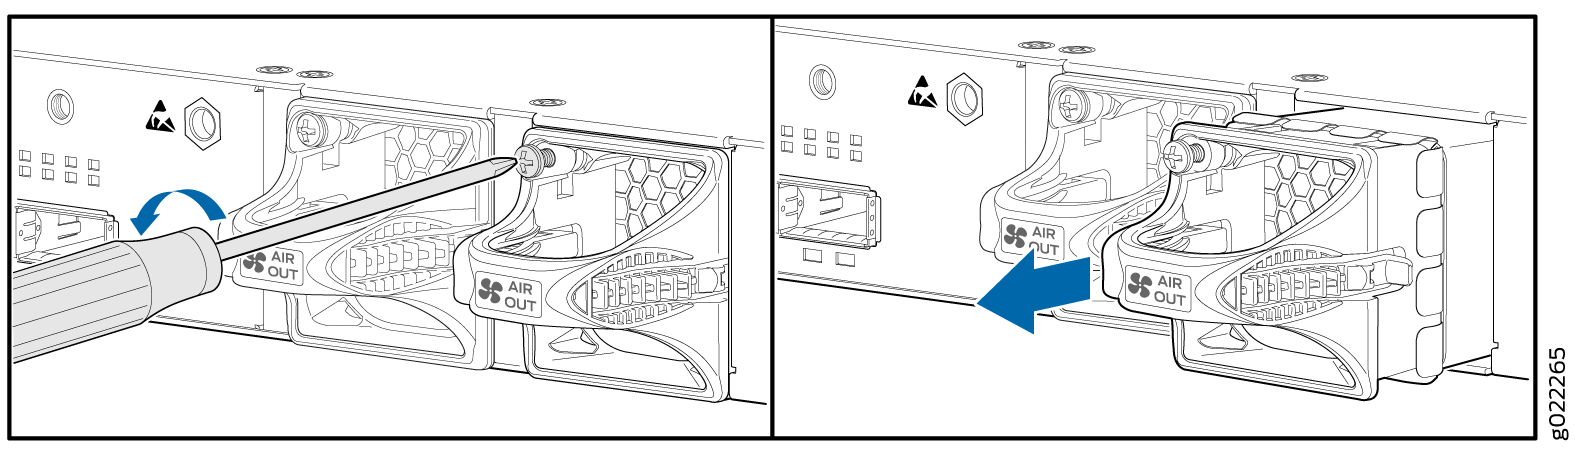 Removing a Fan Module from an EX3400 Switch